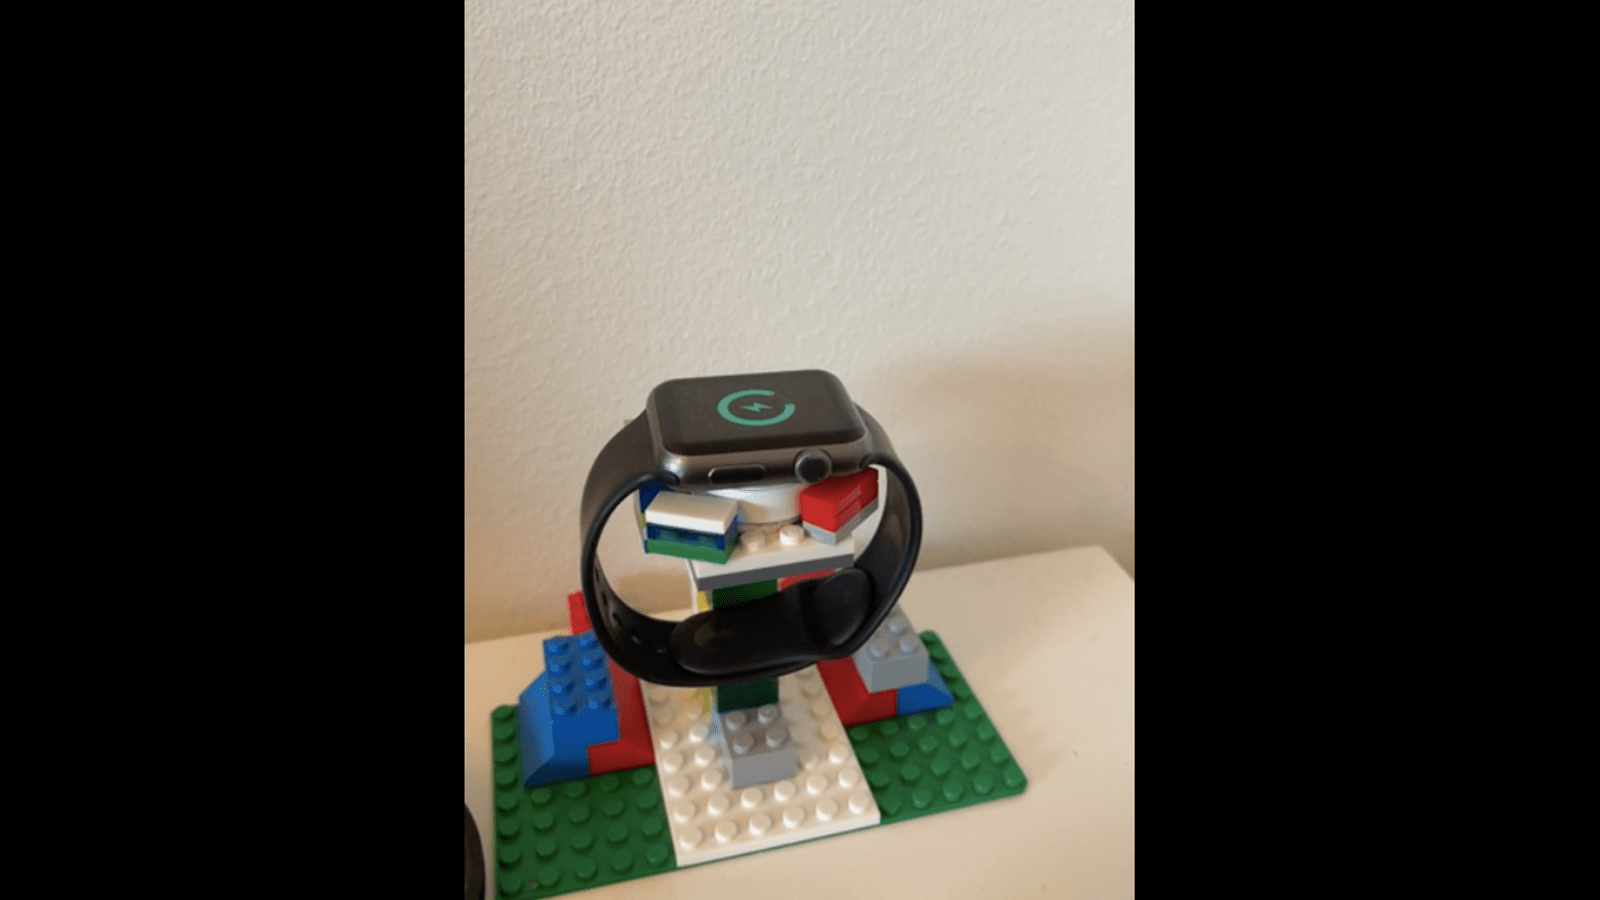 Redditors Are Showing You How to Turn Your Lego Sets Into Apple Watch Docks